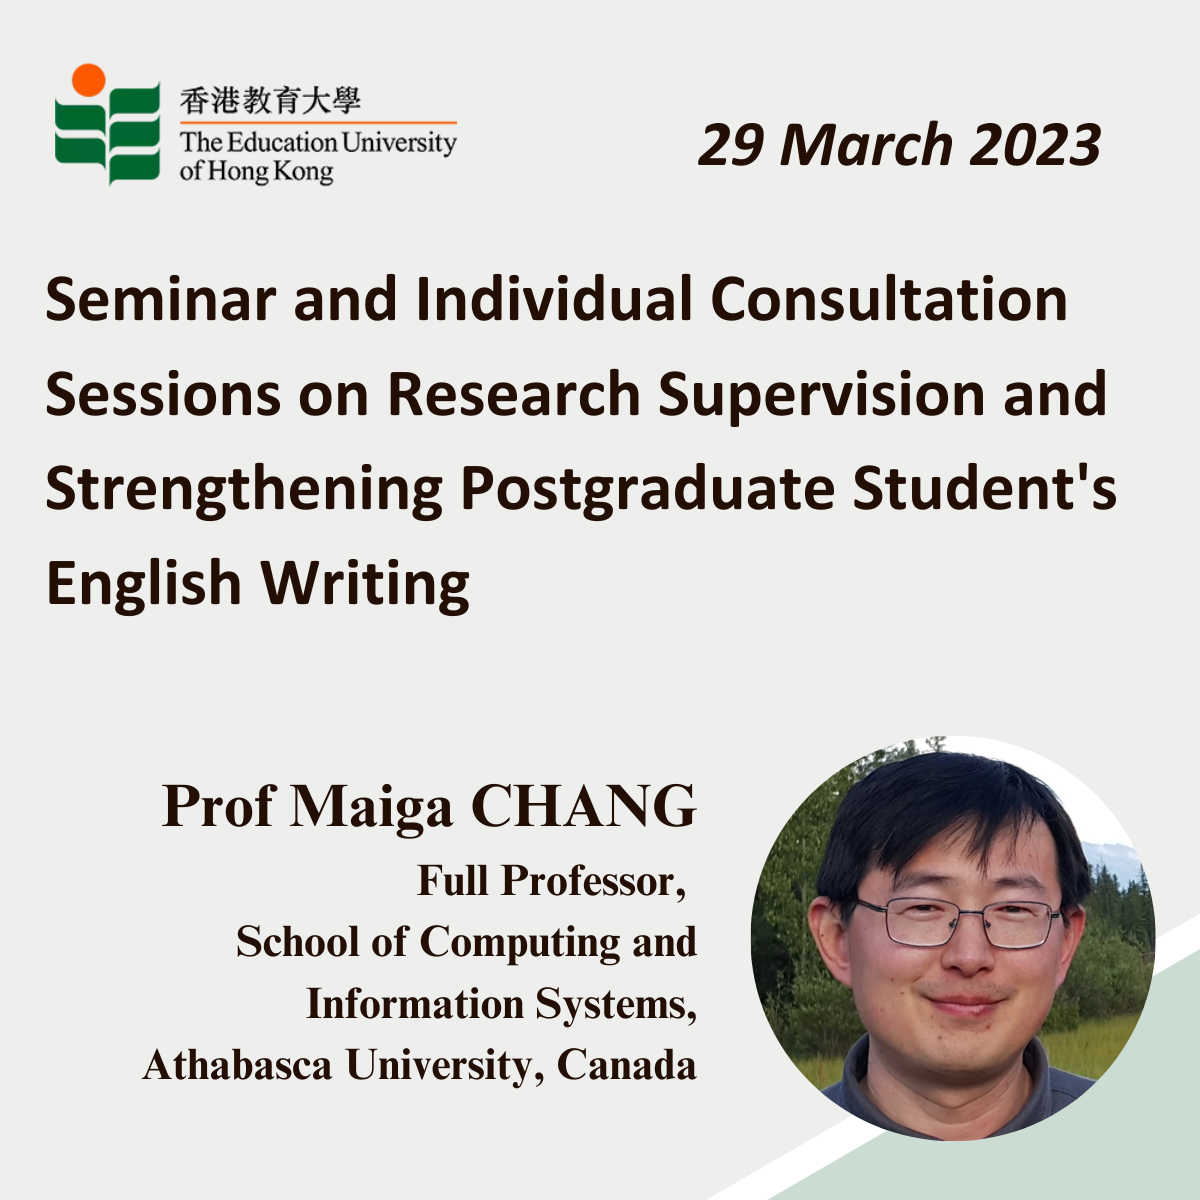 Seminar and Individual Consultation on Research Supervision and Strengthening Postgraduate Students’ English Writing